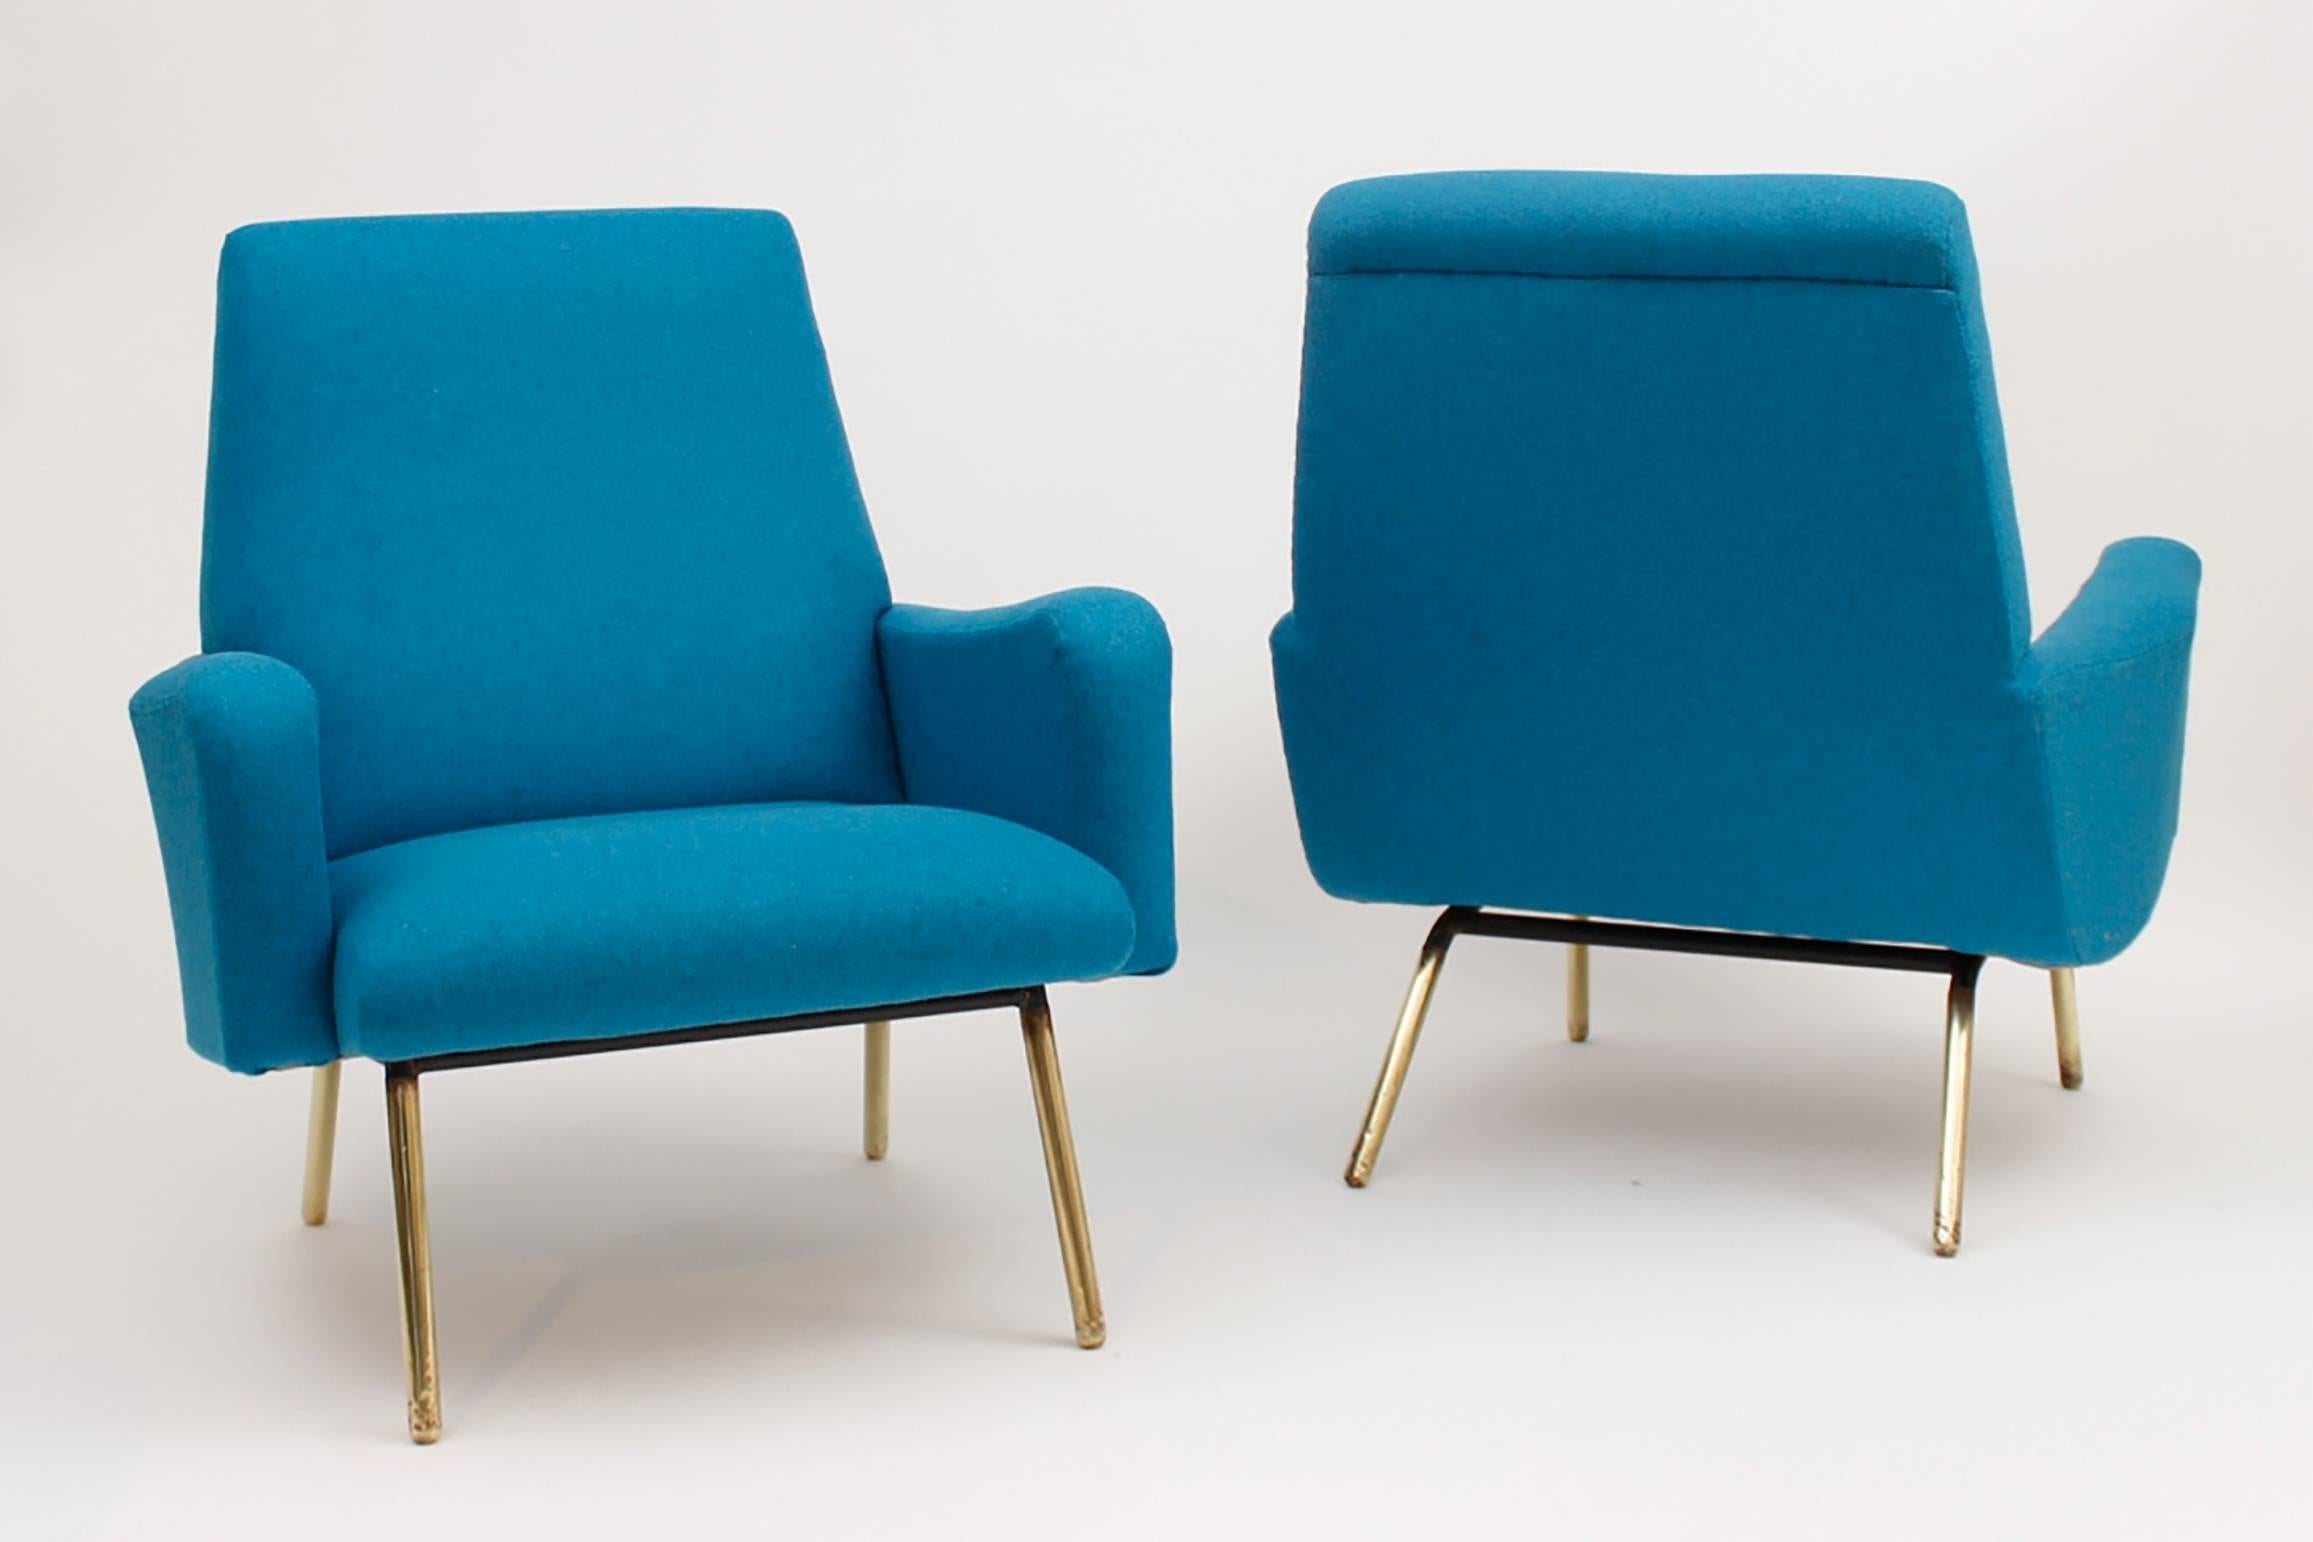 Pair of Gerard Guermonprez armchairs, France, circa 1950.
Newly upholstered in blue Casal fabric, polished brass legs.